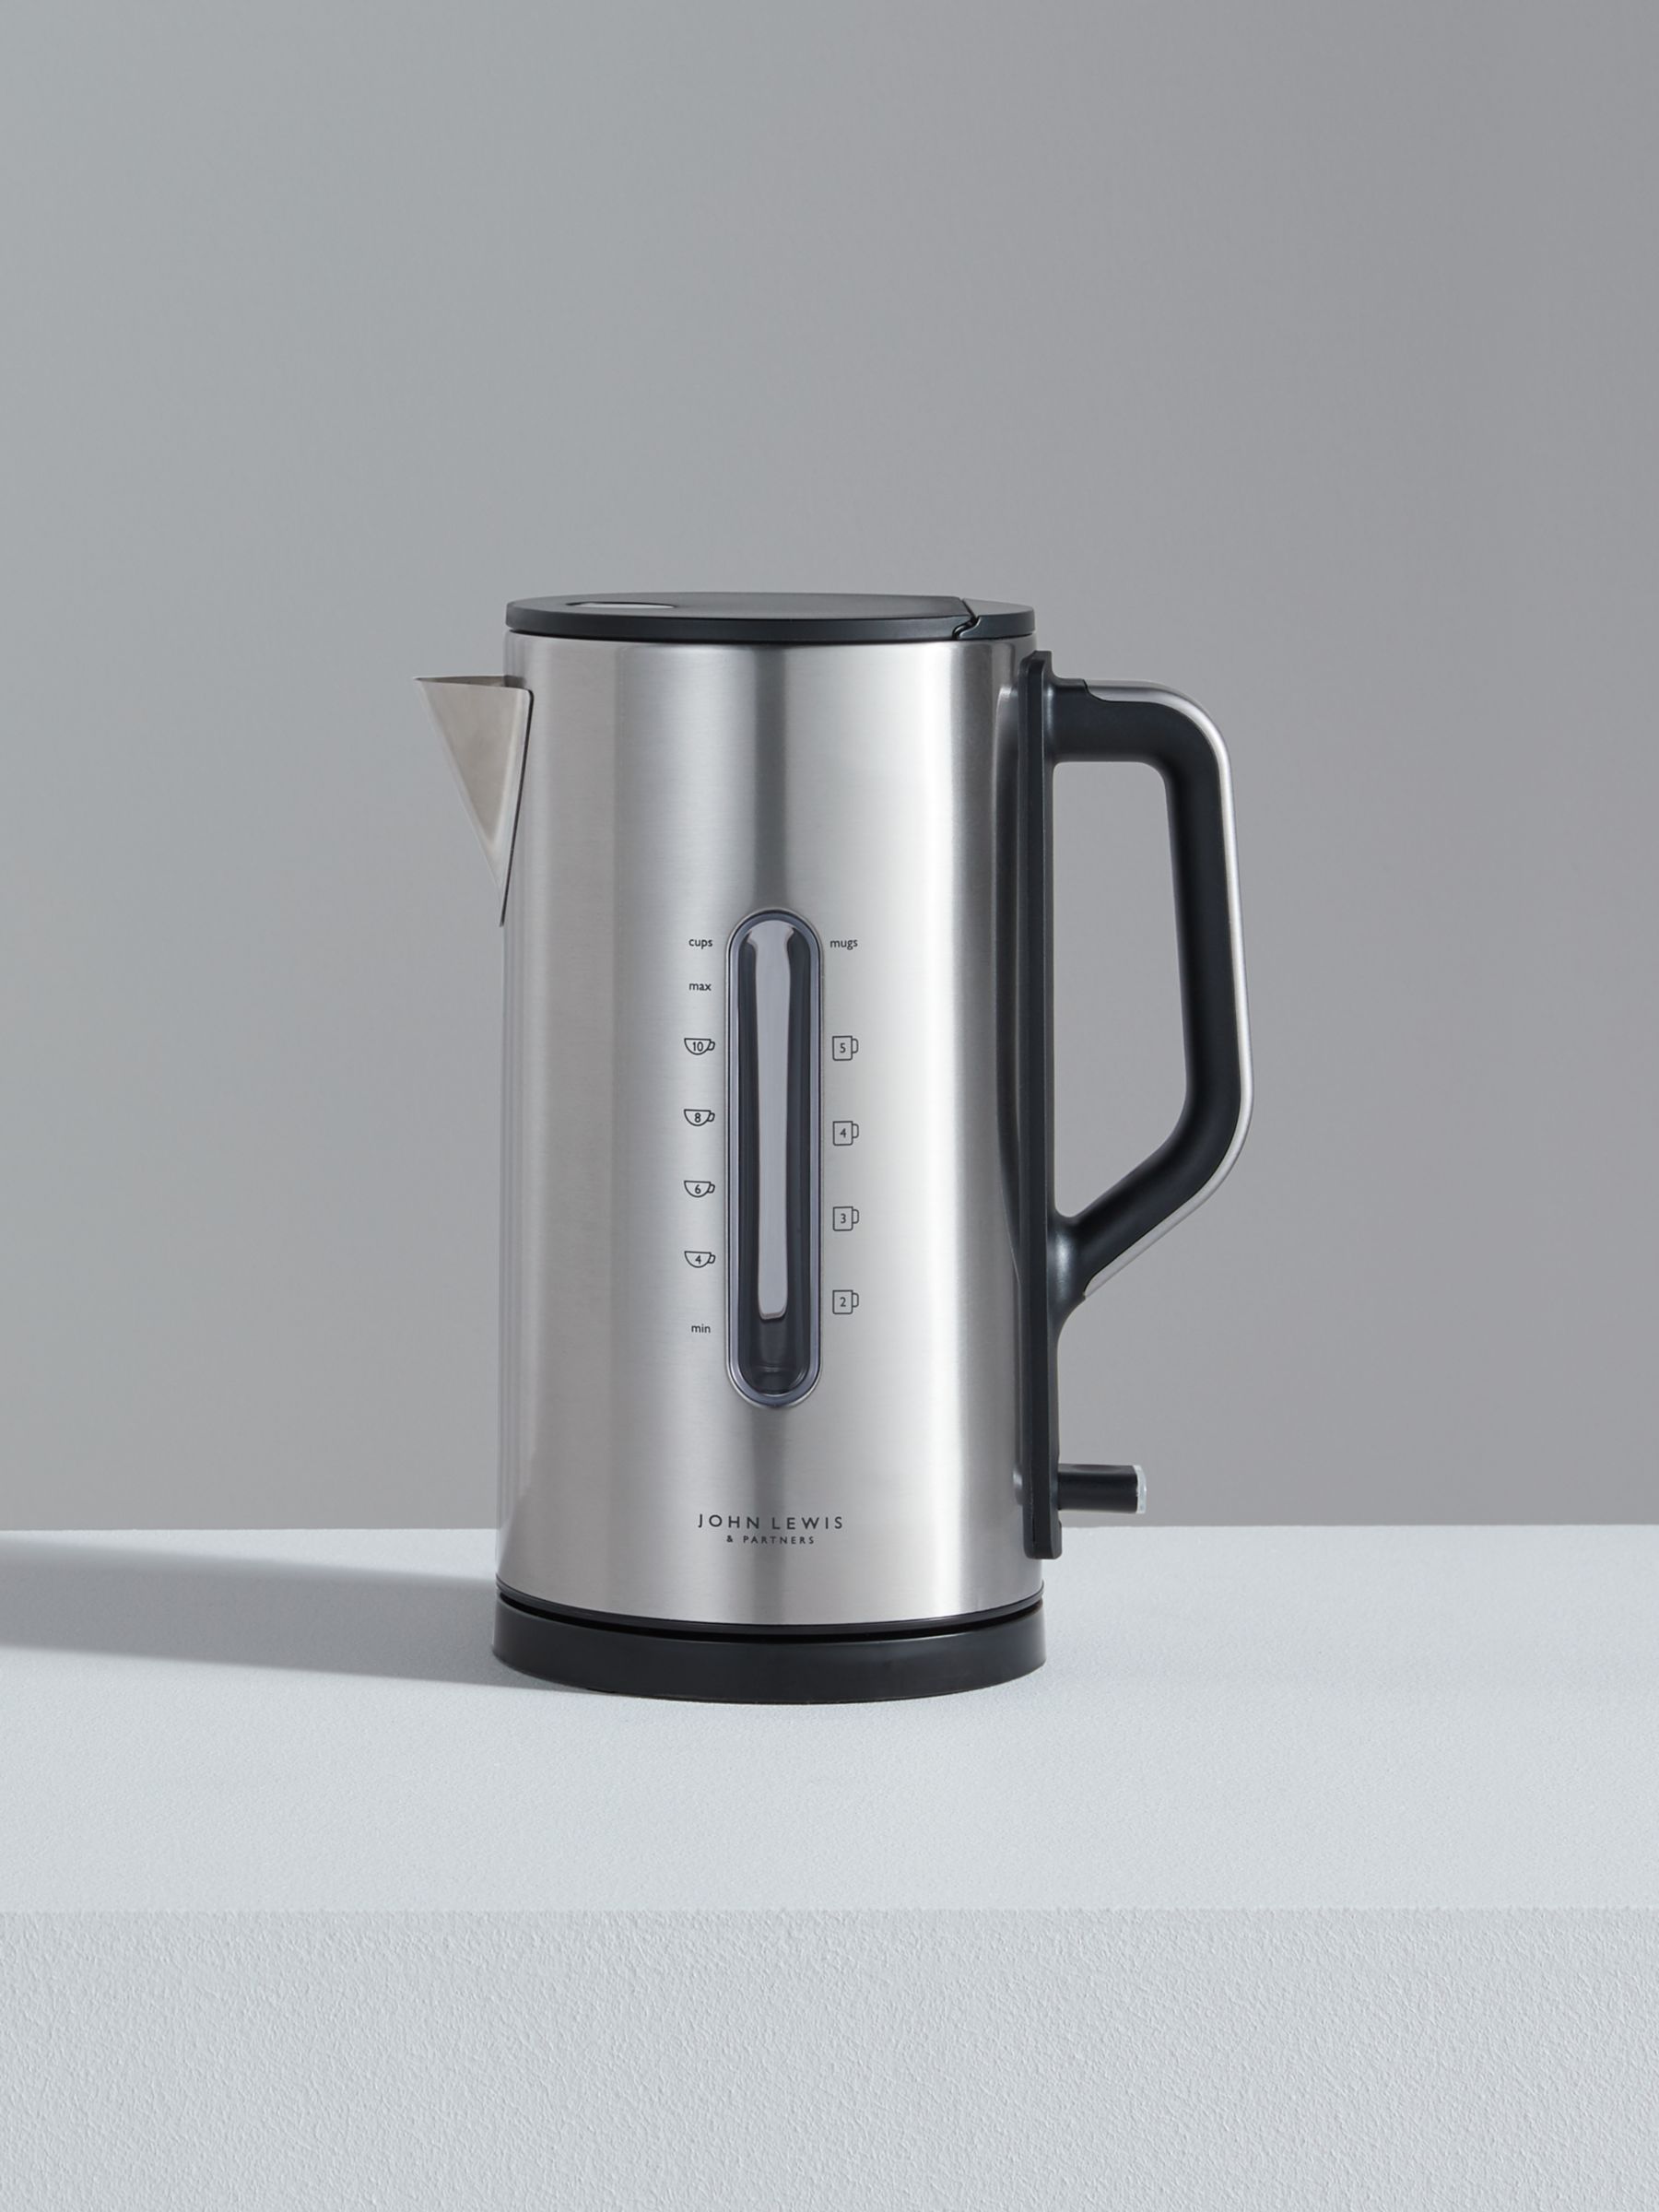 electric stainless steel kettle